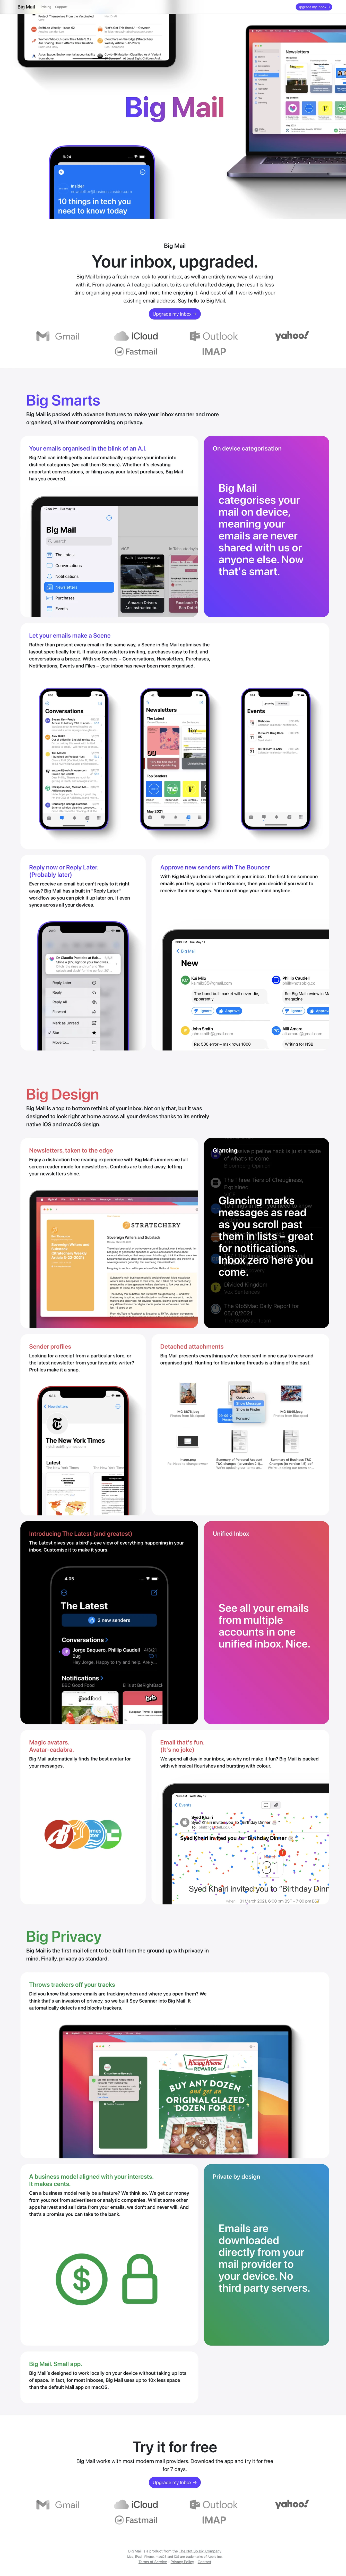 Big Mail Landing Page Example: Upgrade your inbox with Big Mail, an all new, all native email client for iOS and macOS.